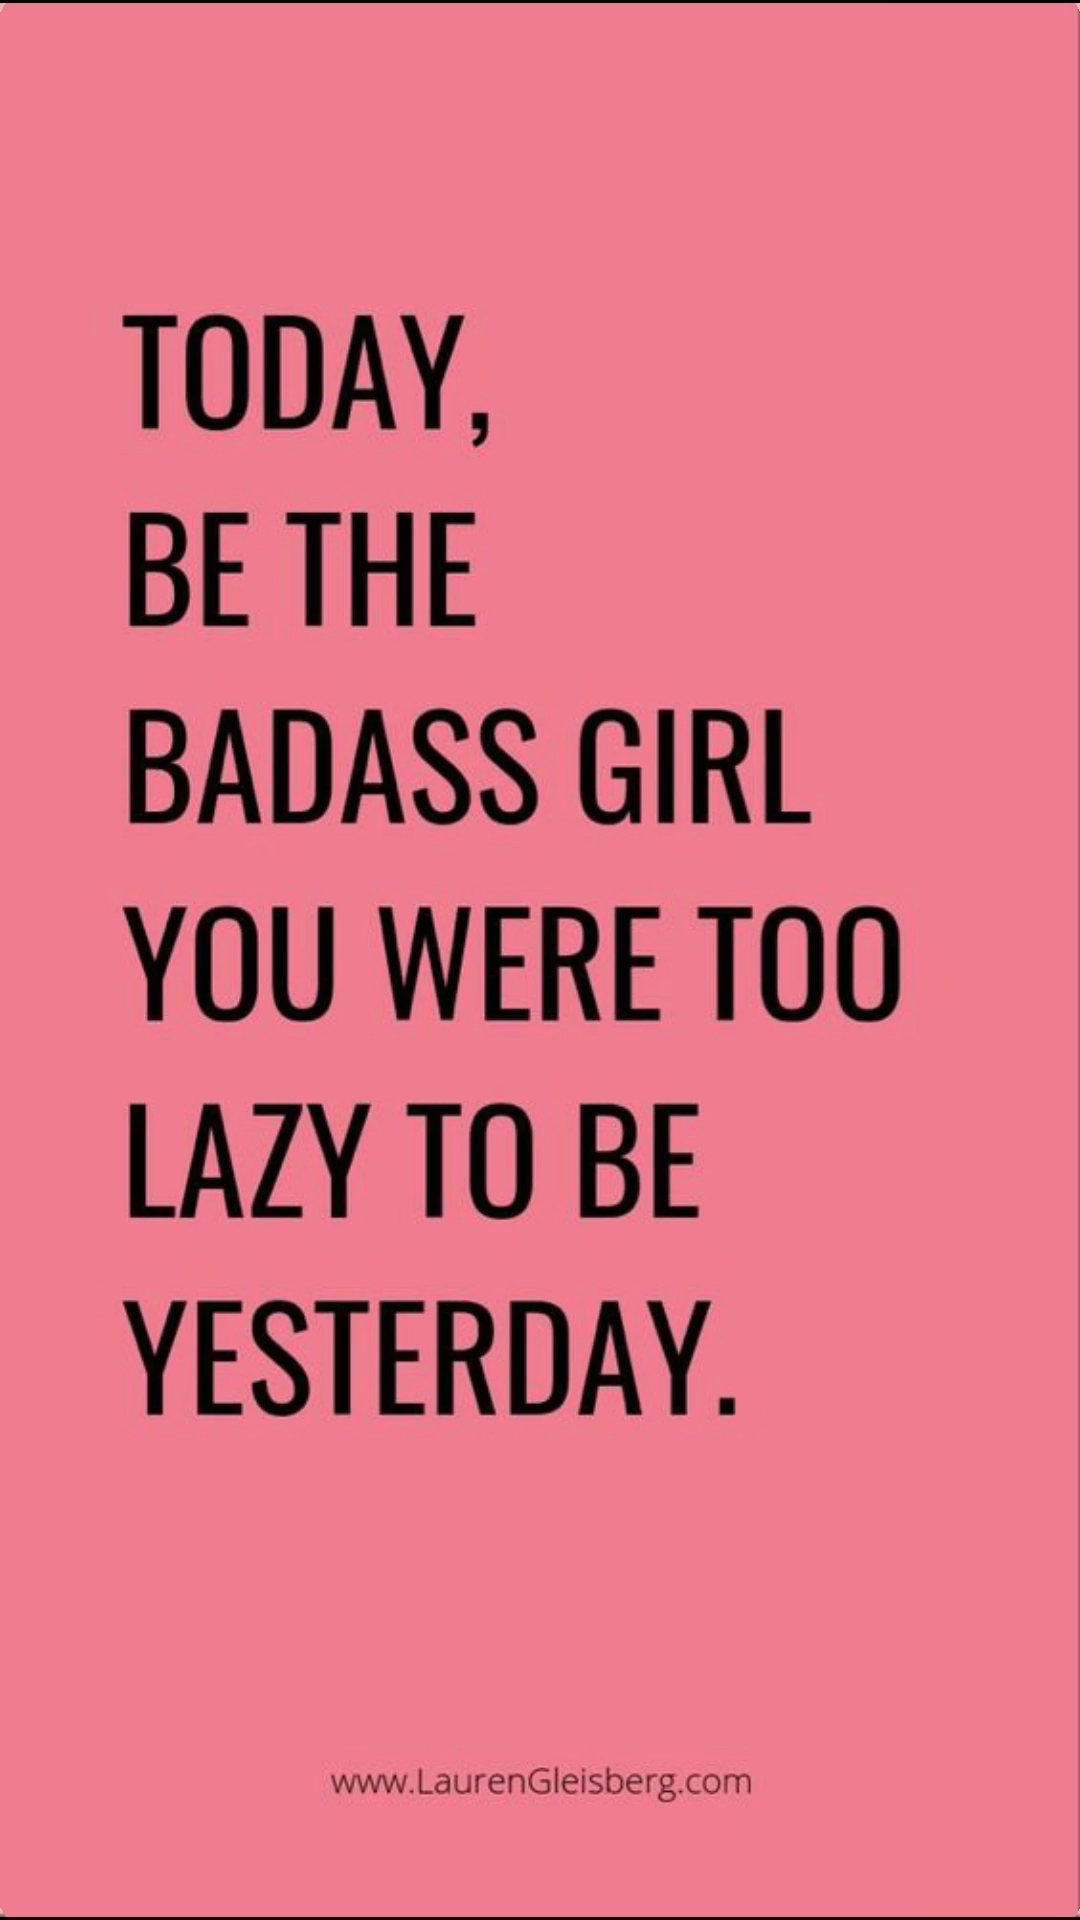 Motivational Quotes for Women | Quotations - Motivational Quotes for Women | Quotations -   16 fitness Quotes weights ideas